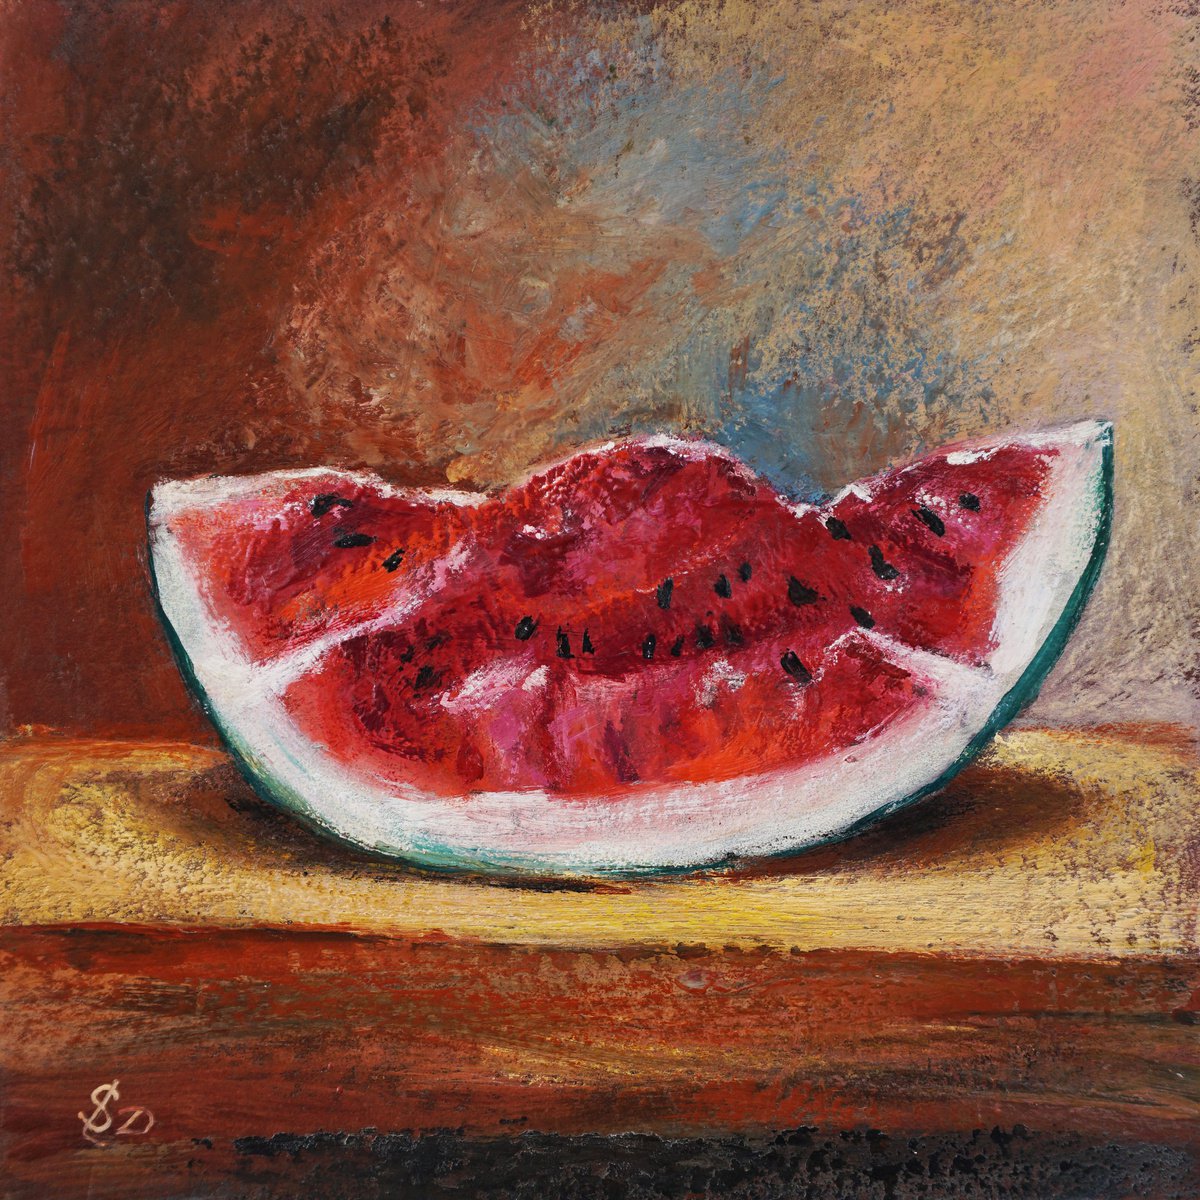 Melon slices (hot wax on greyboard) by Dora Stork